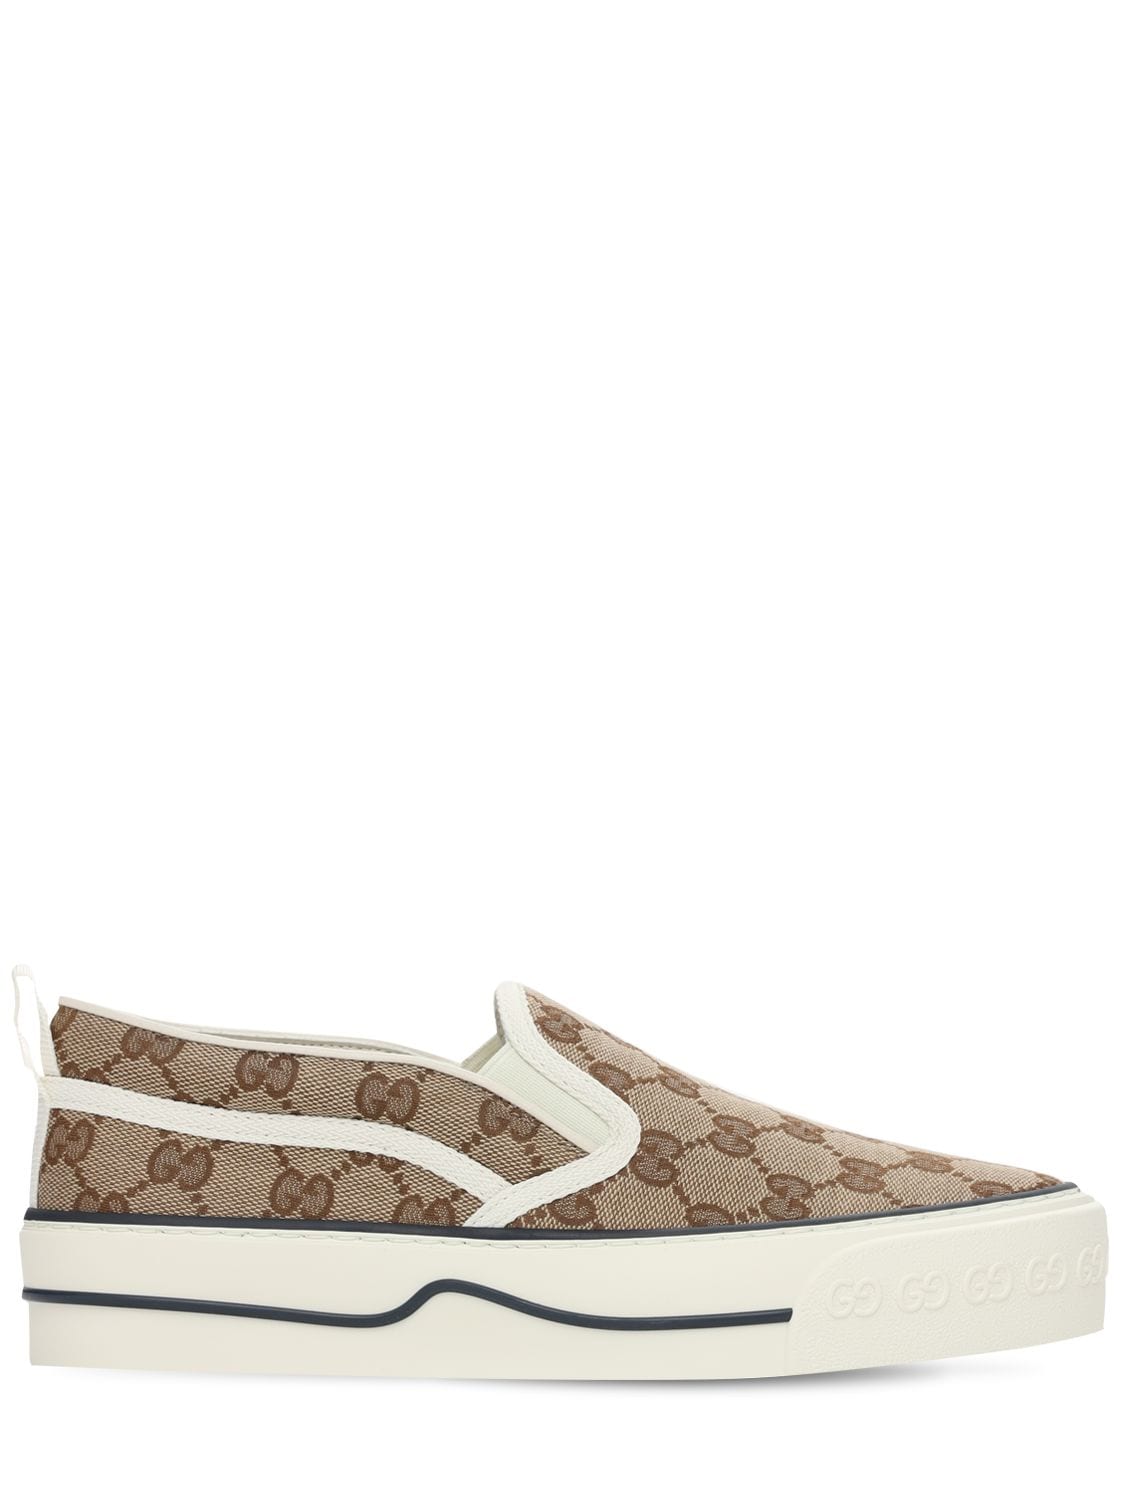 20mm Gucci Tennis 1977 Slip-on Sneakers